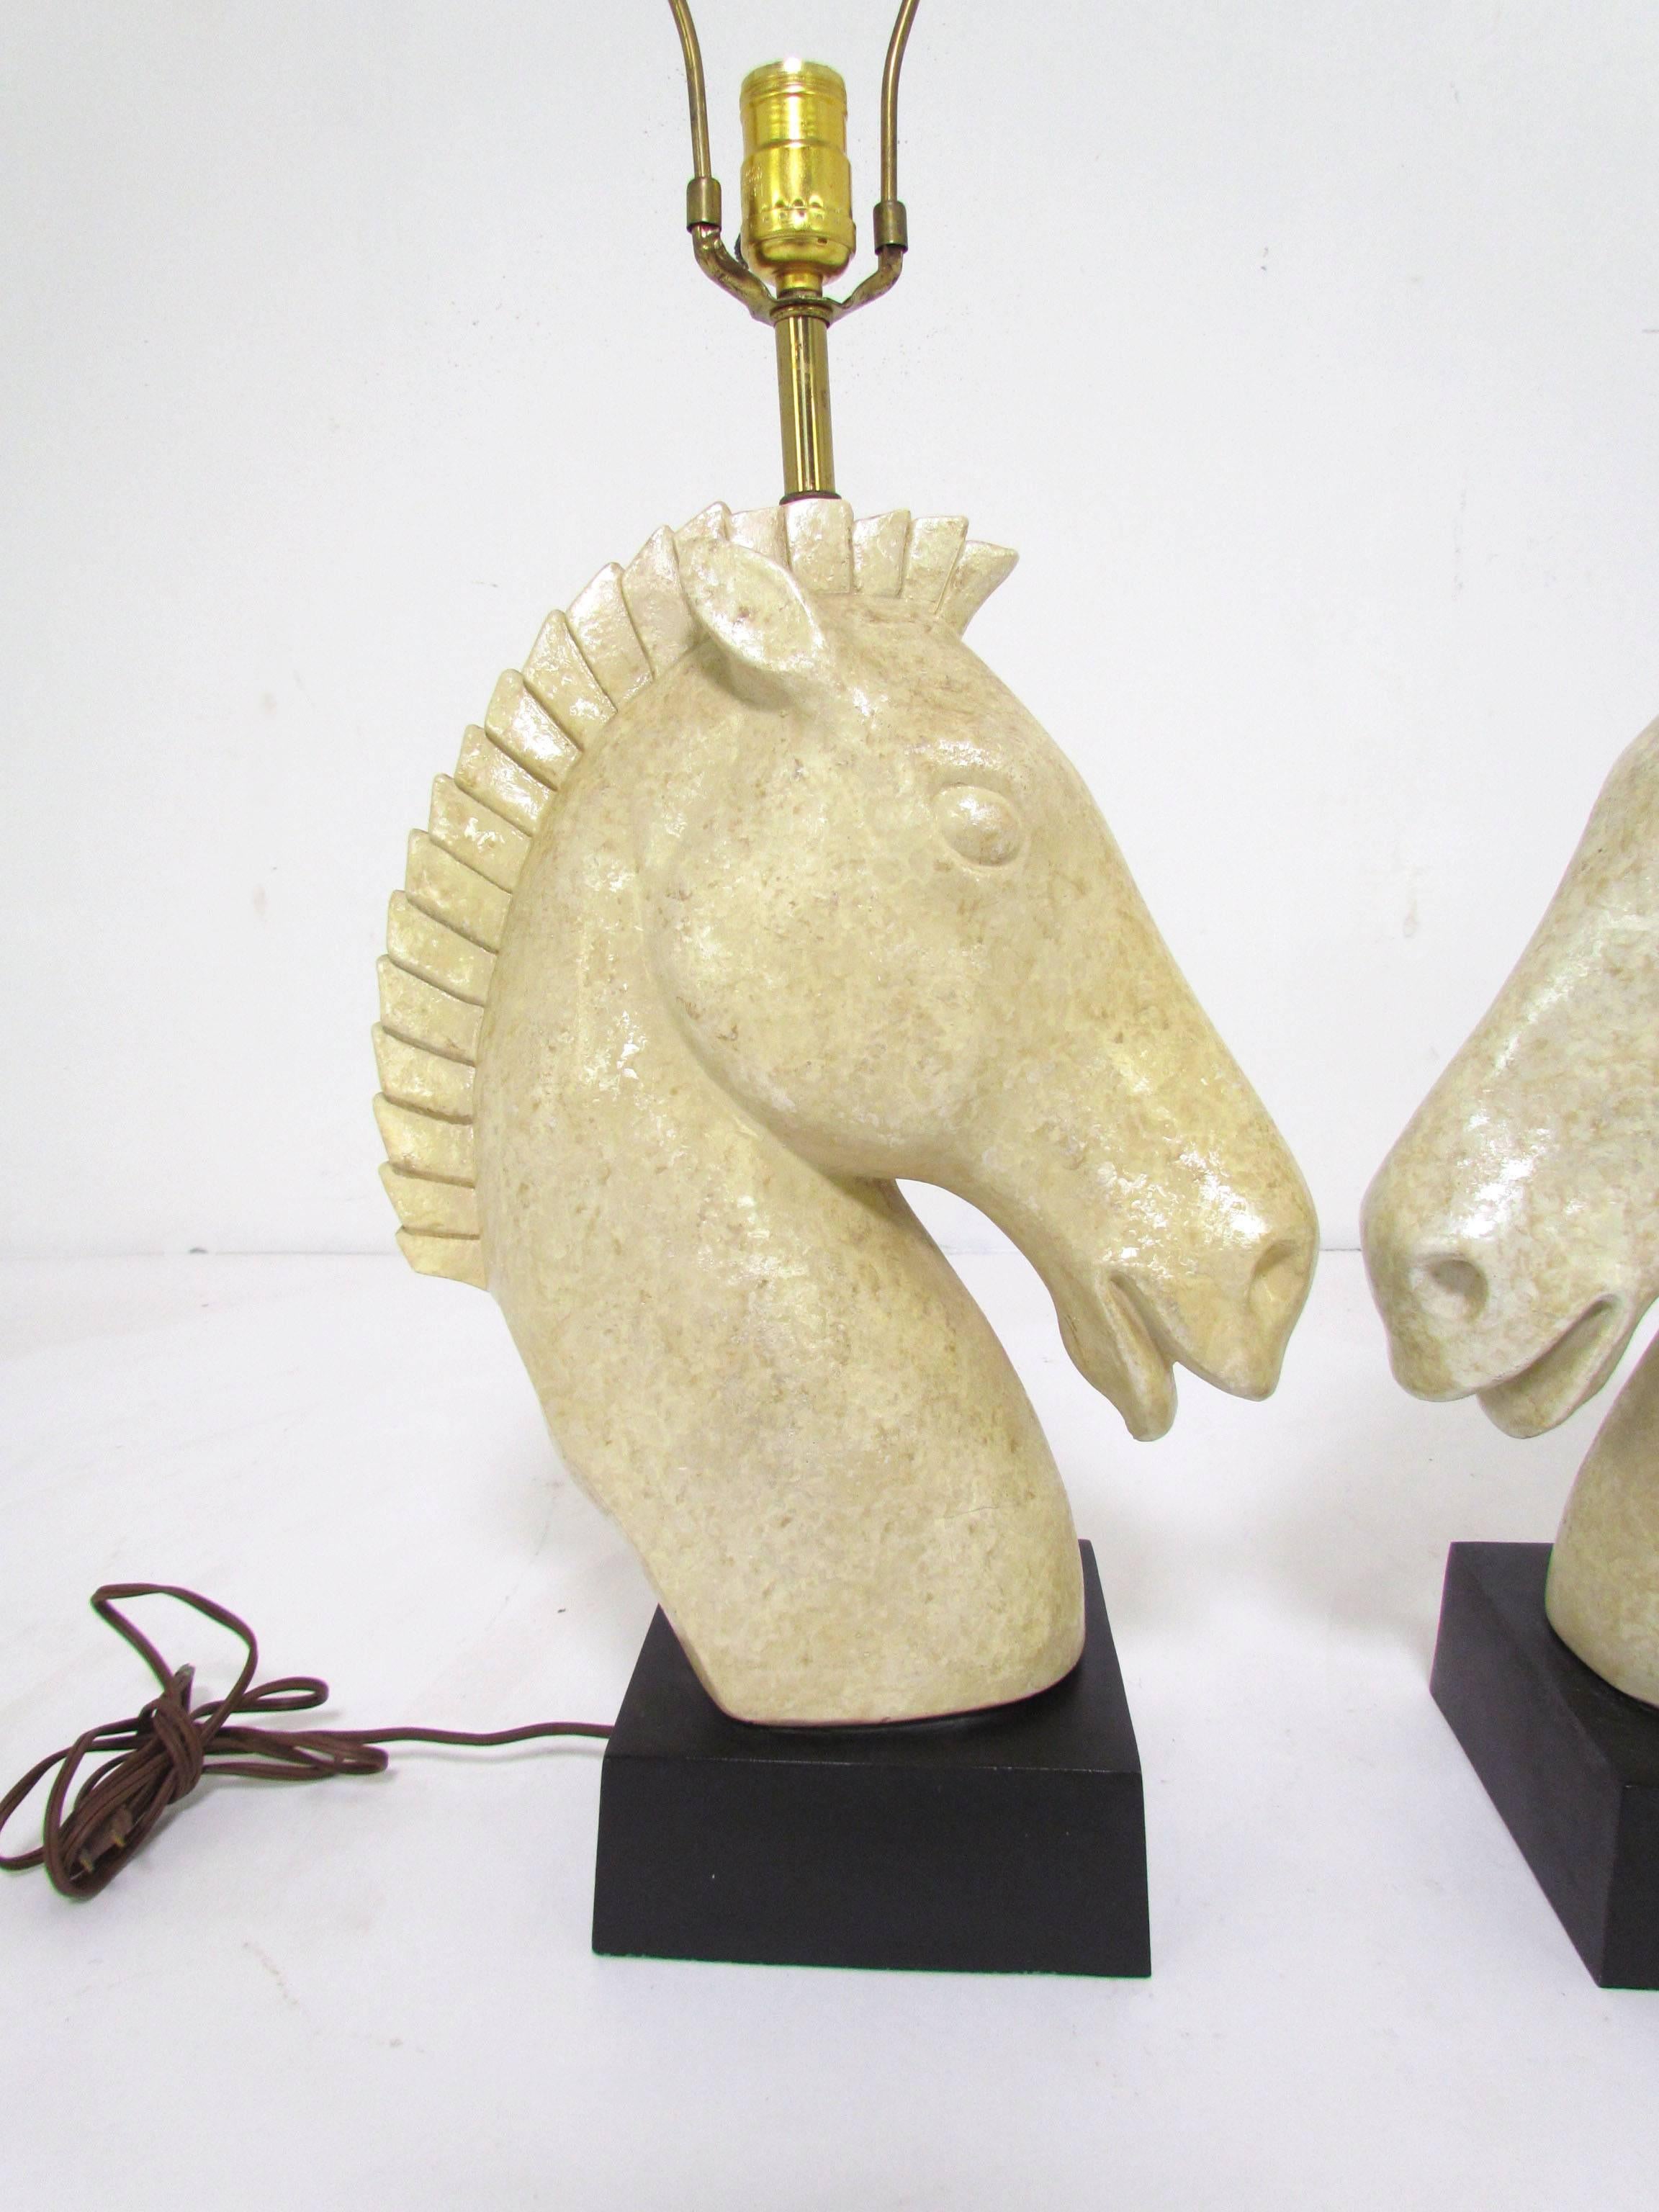 Pair of horse head table lamps, signed Fortune Lamp Co. and dated 1961. Pearlescent glaze over chalk ware.

Height to top of finials is 30